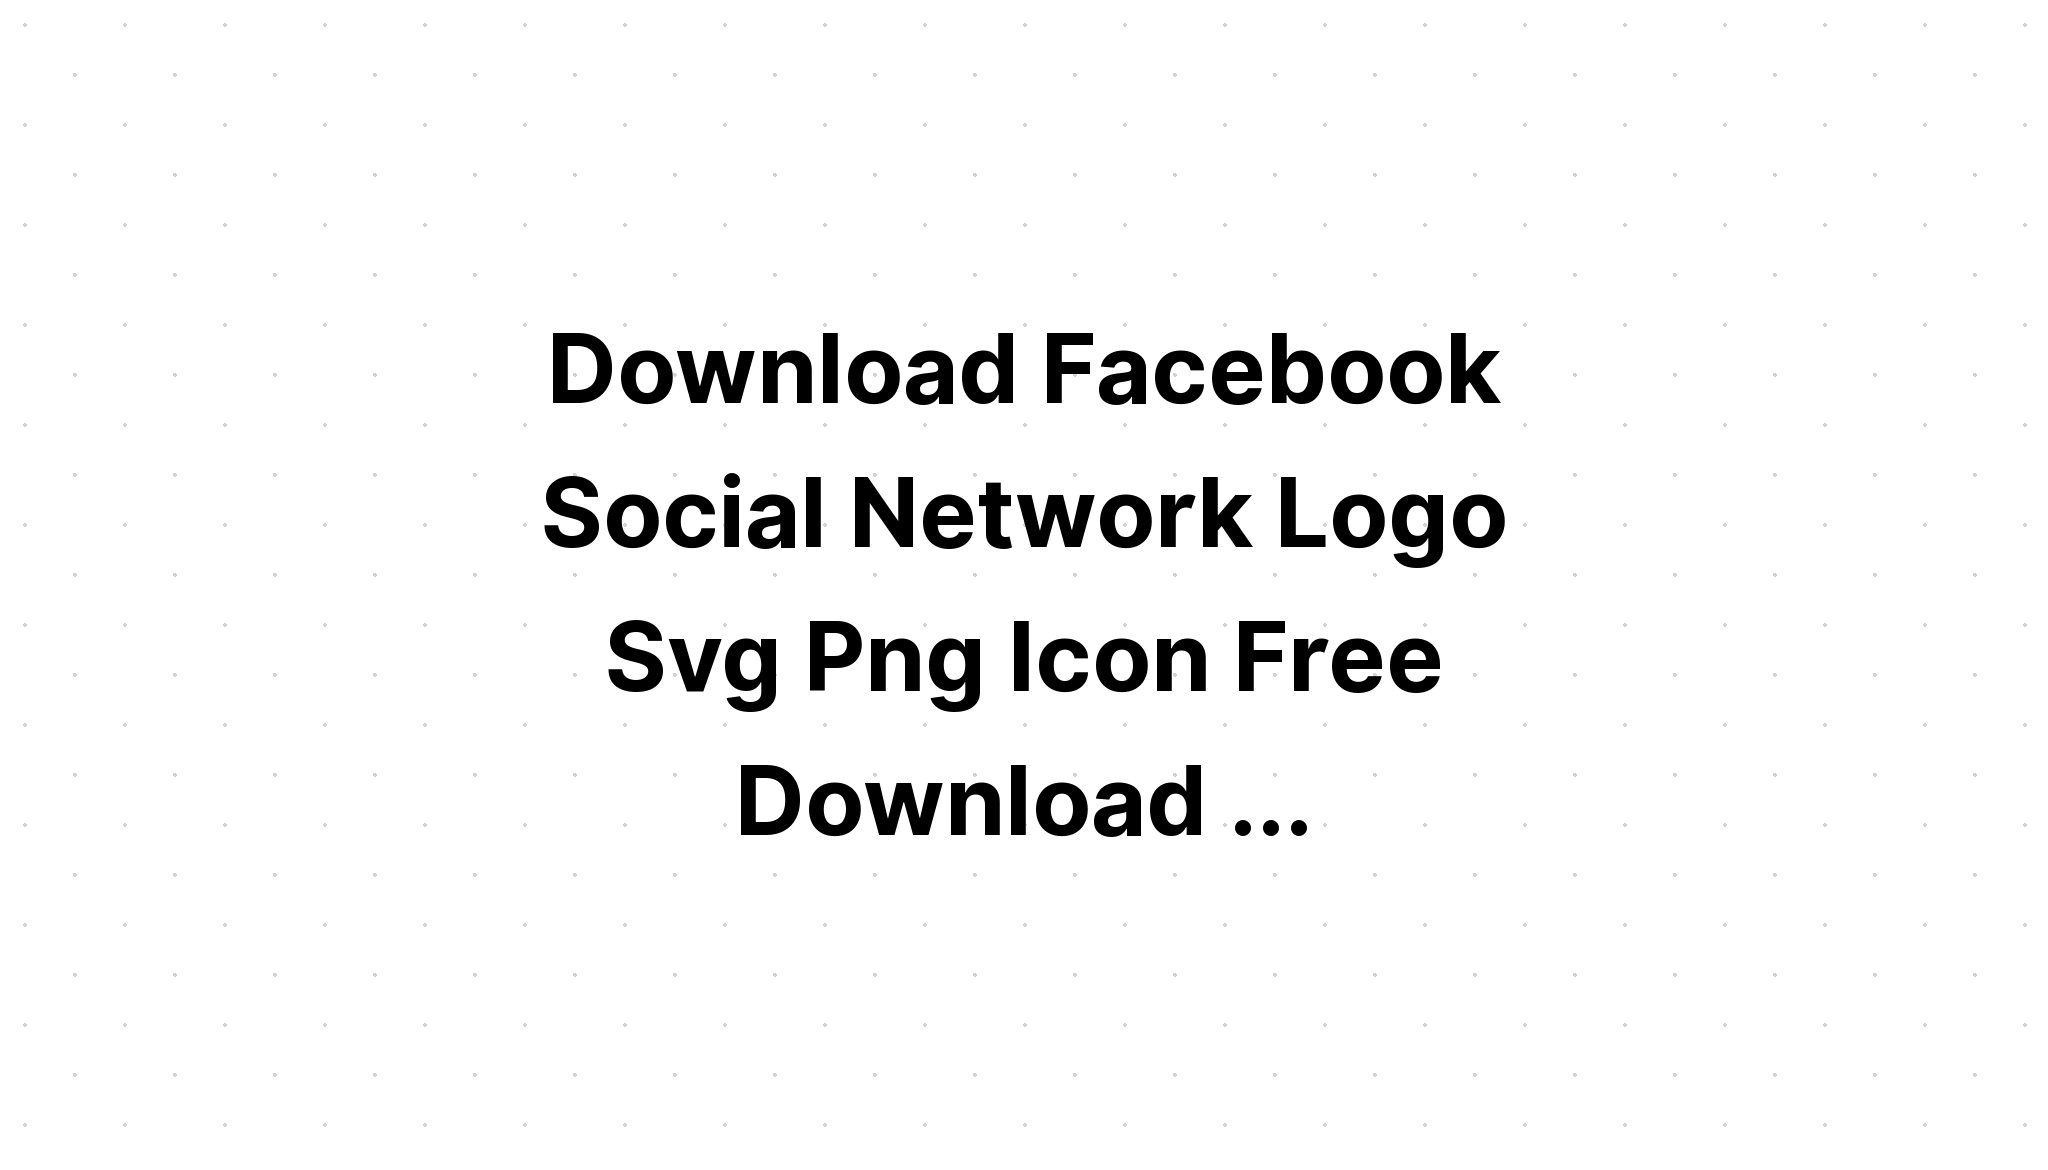 Facebook Icon Svg Free Download Best Free Icon Download Svg File